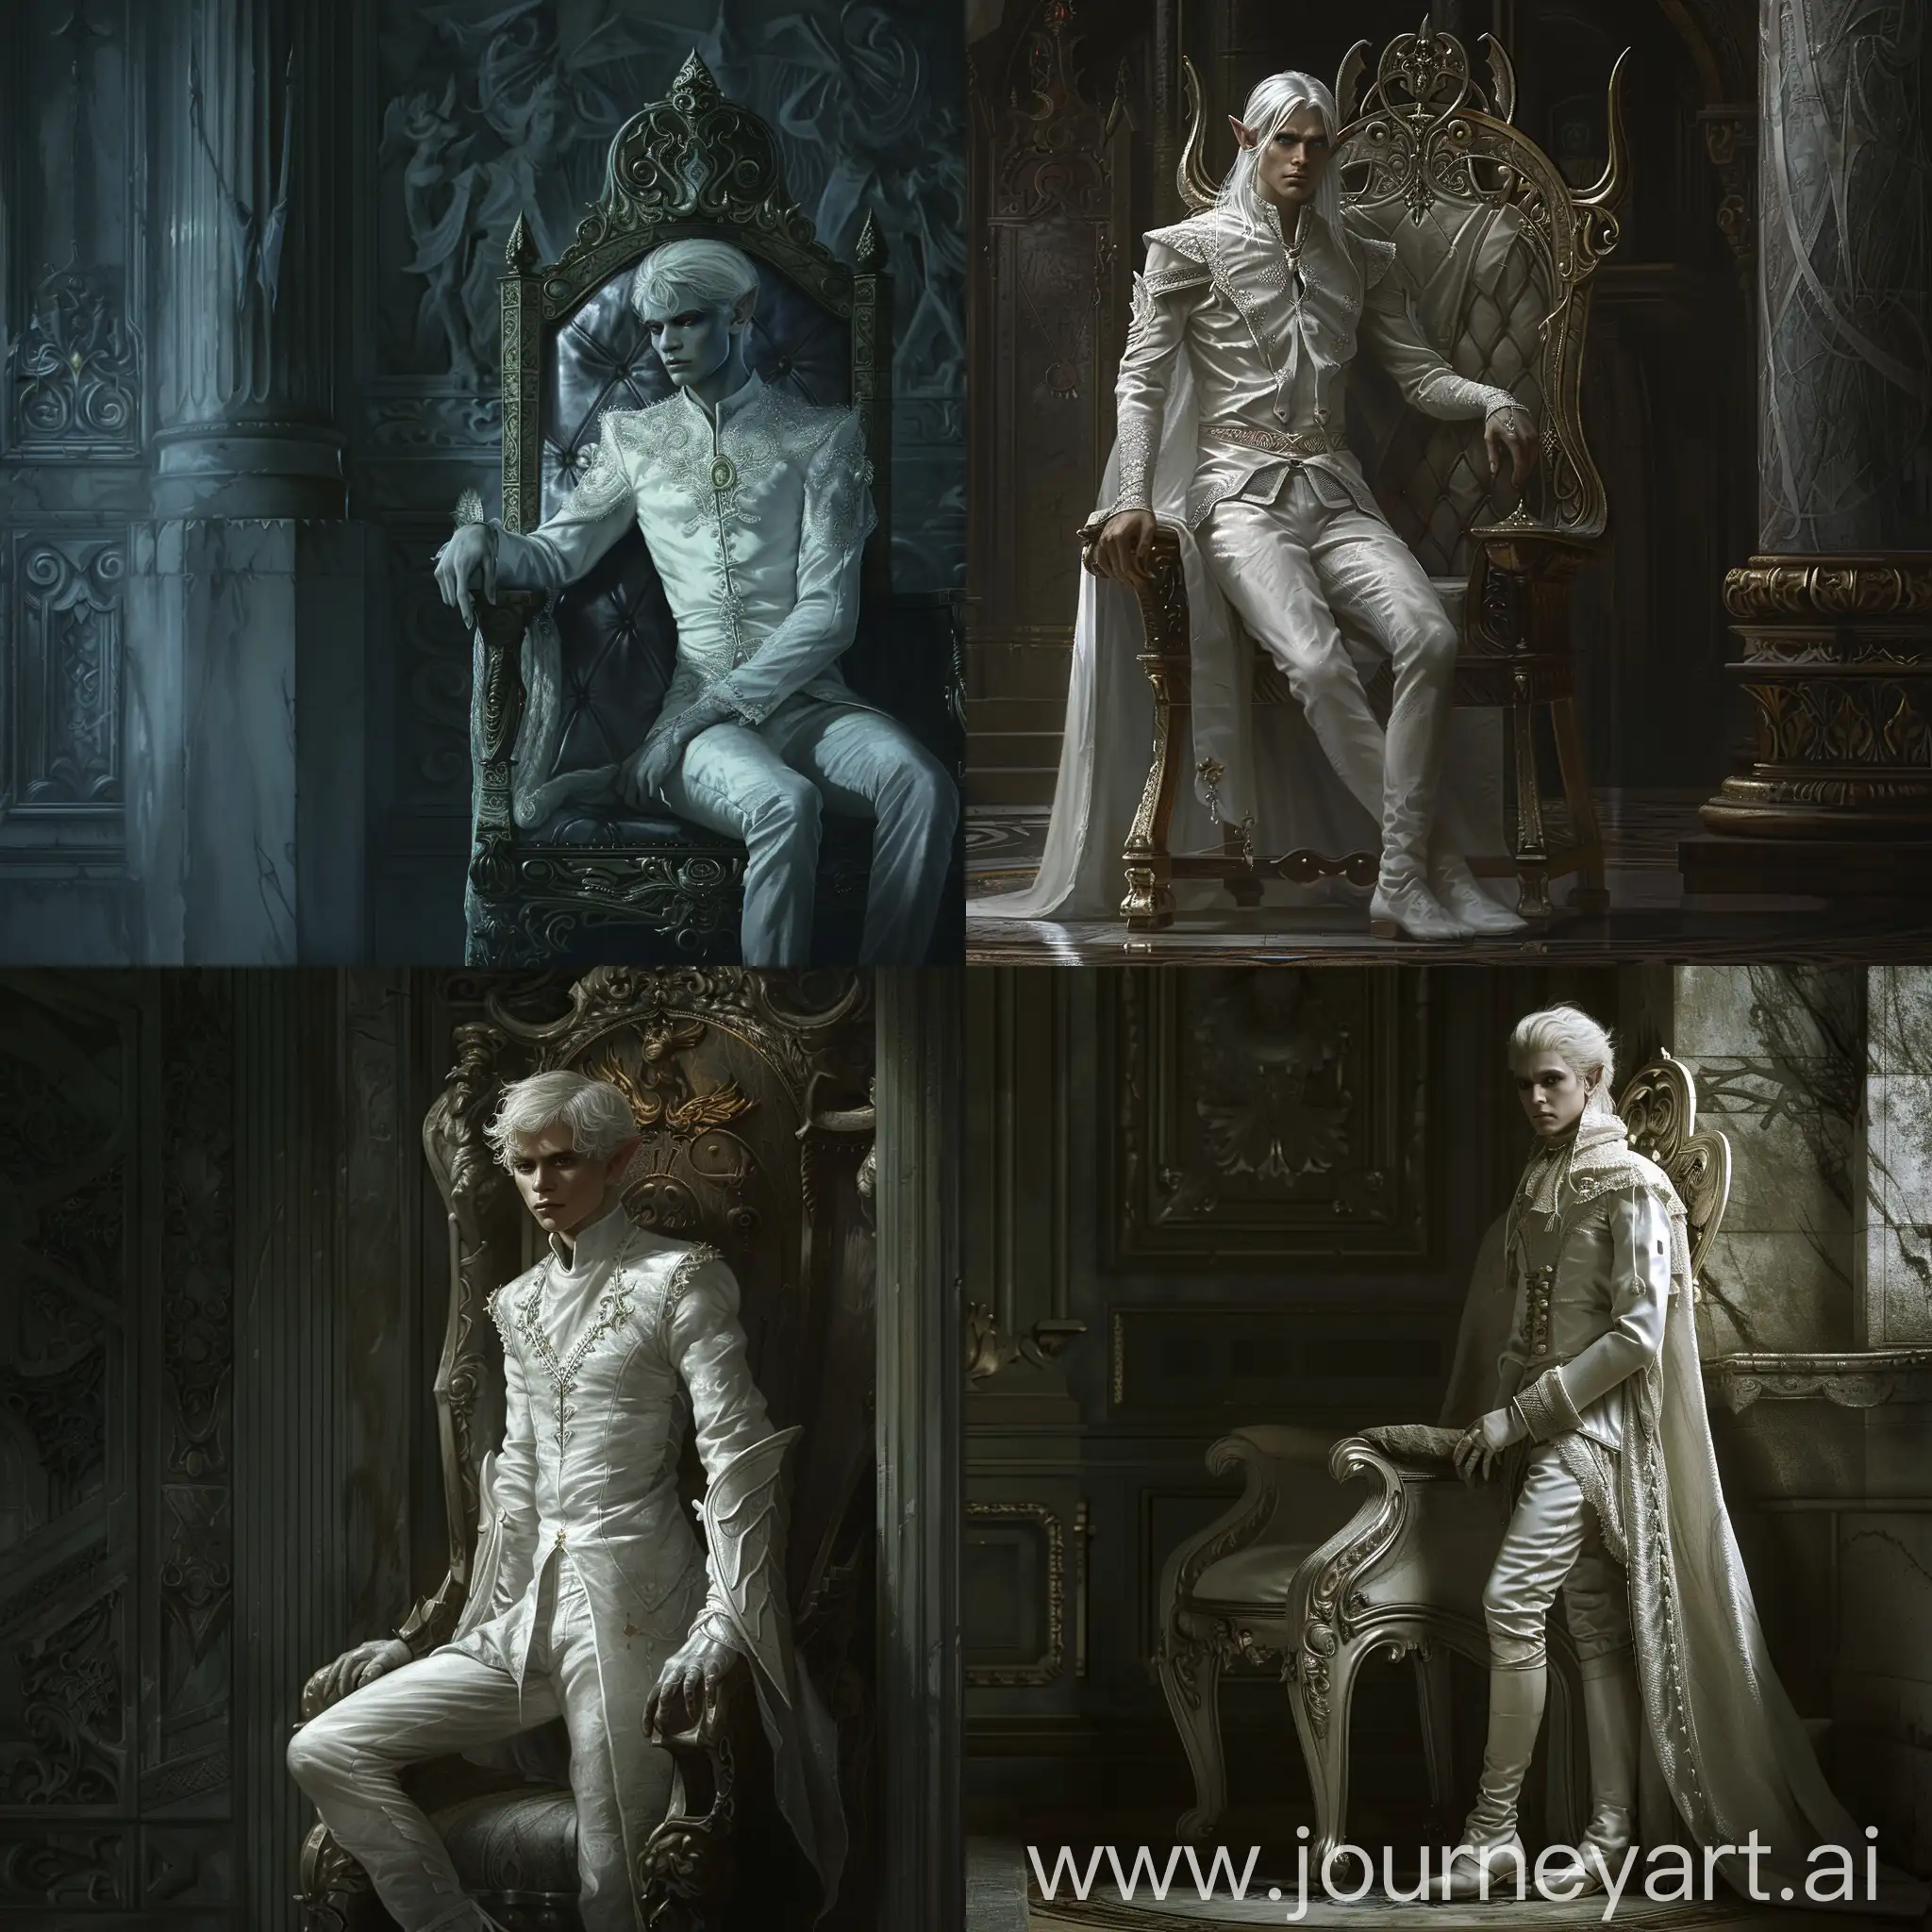 Sinister-Elven-King-in-Majestic-Throne-Room